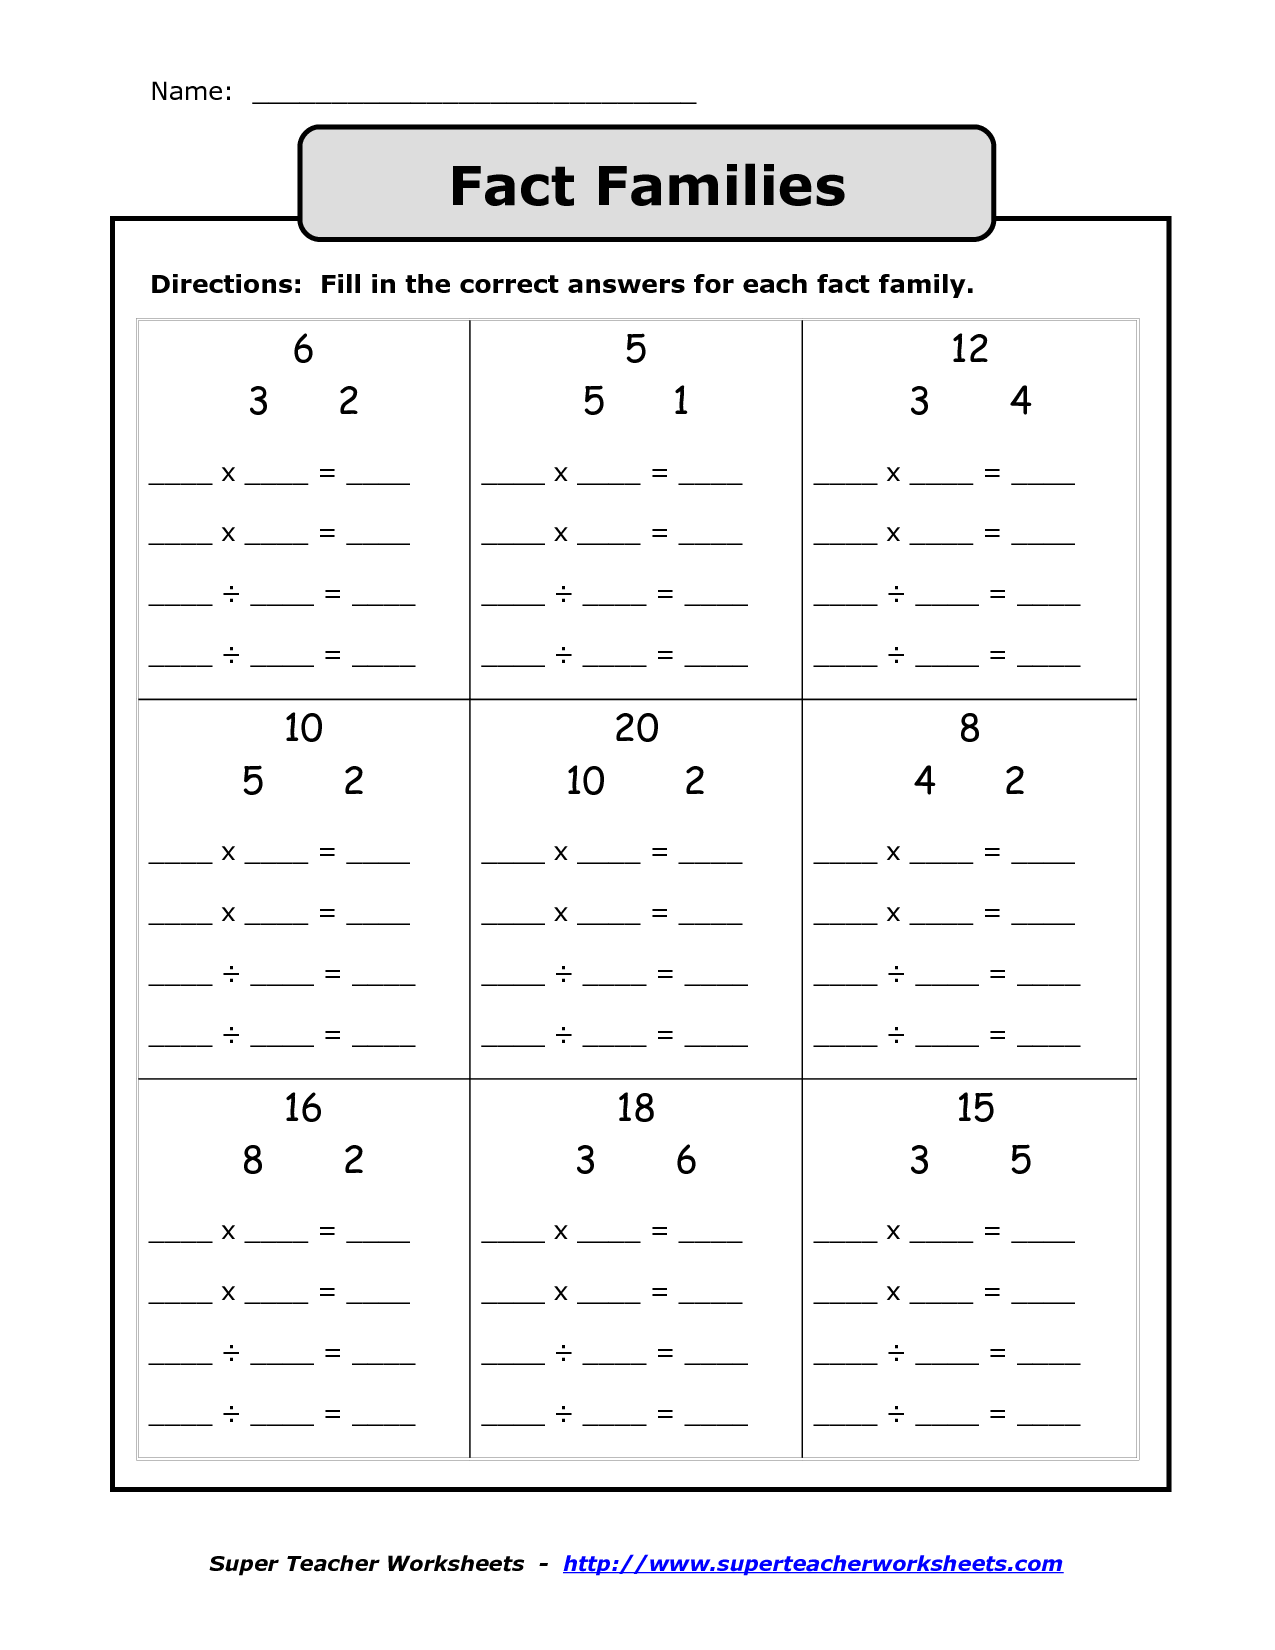 13-best-images-of-teaching-family-worksheets-ar-word-family-worksheets-family-tree-word